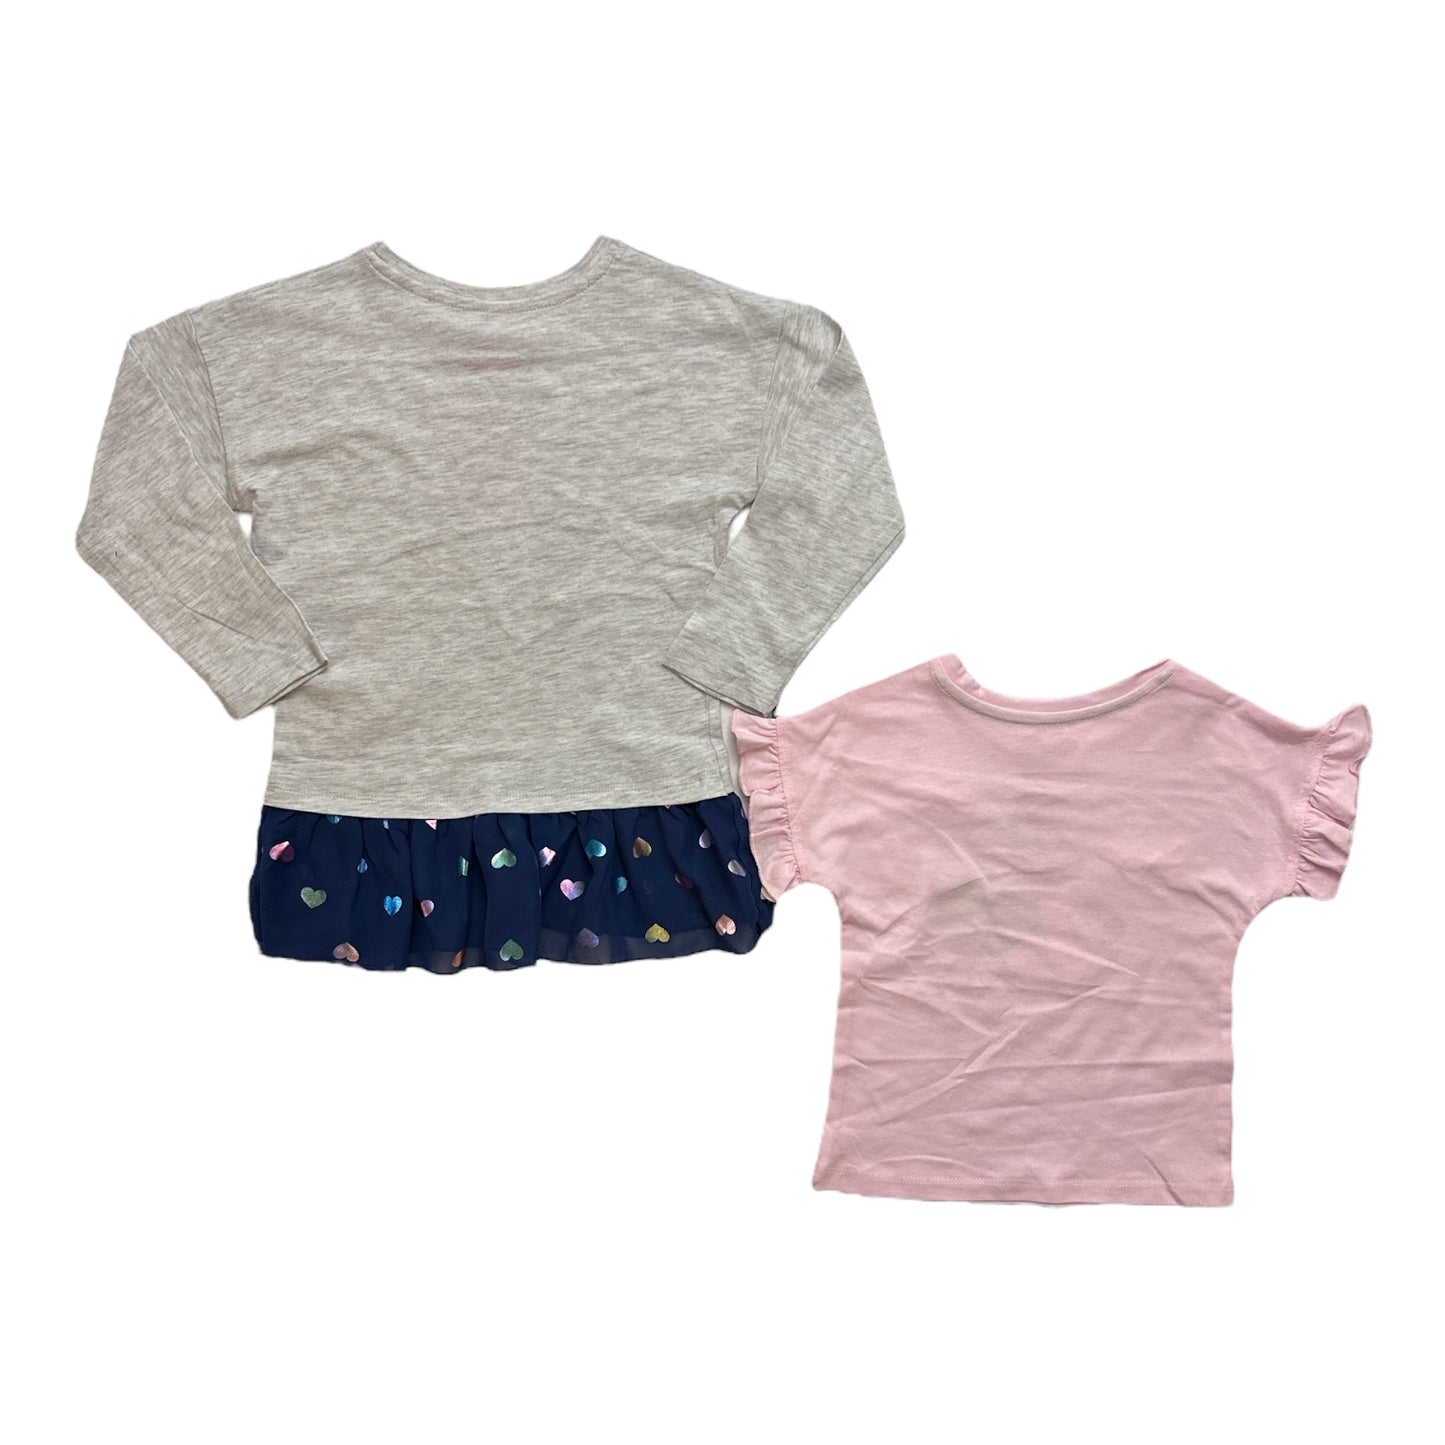 Disney Junior Minnie Mouse Girl's 2-Pack Fashion Tops